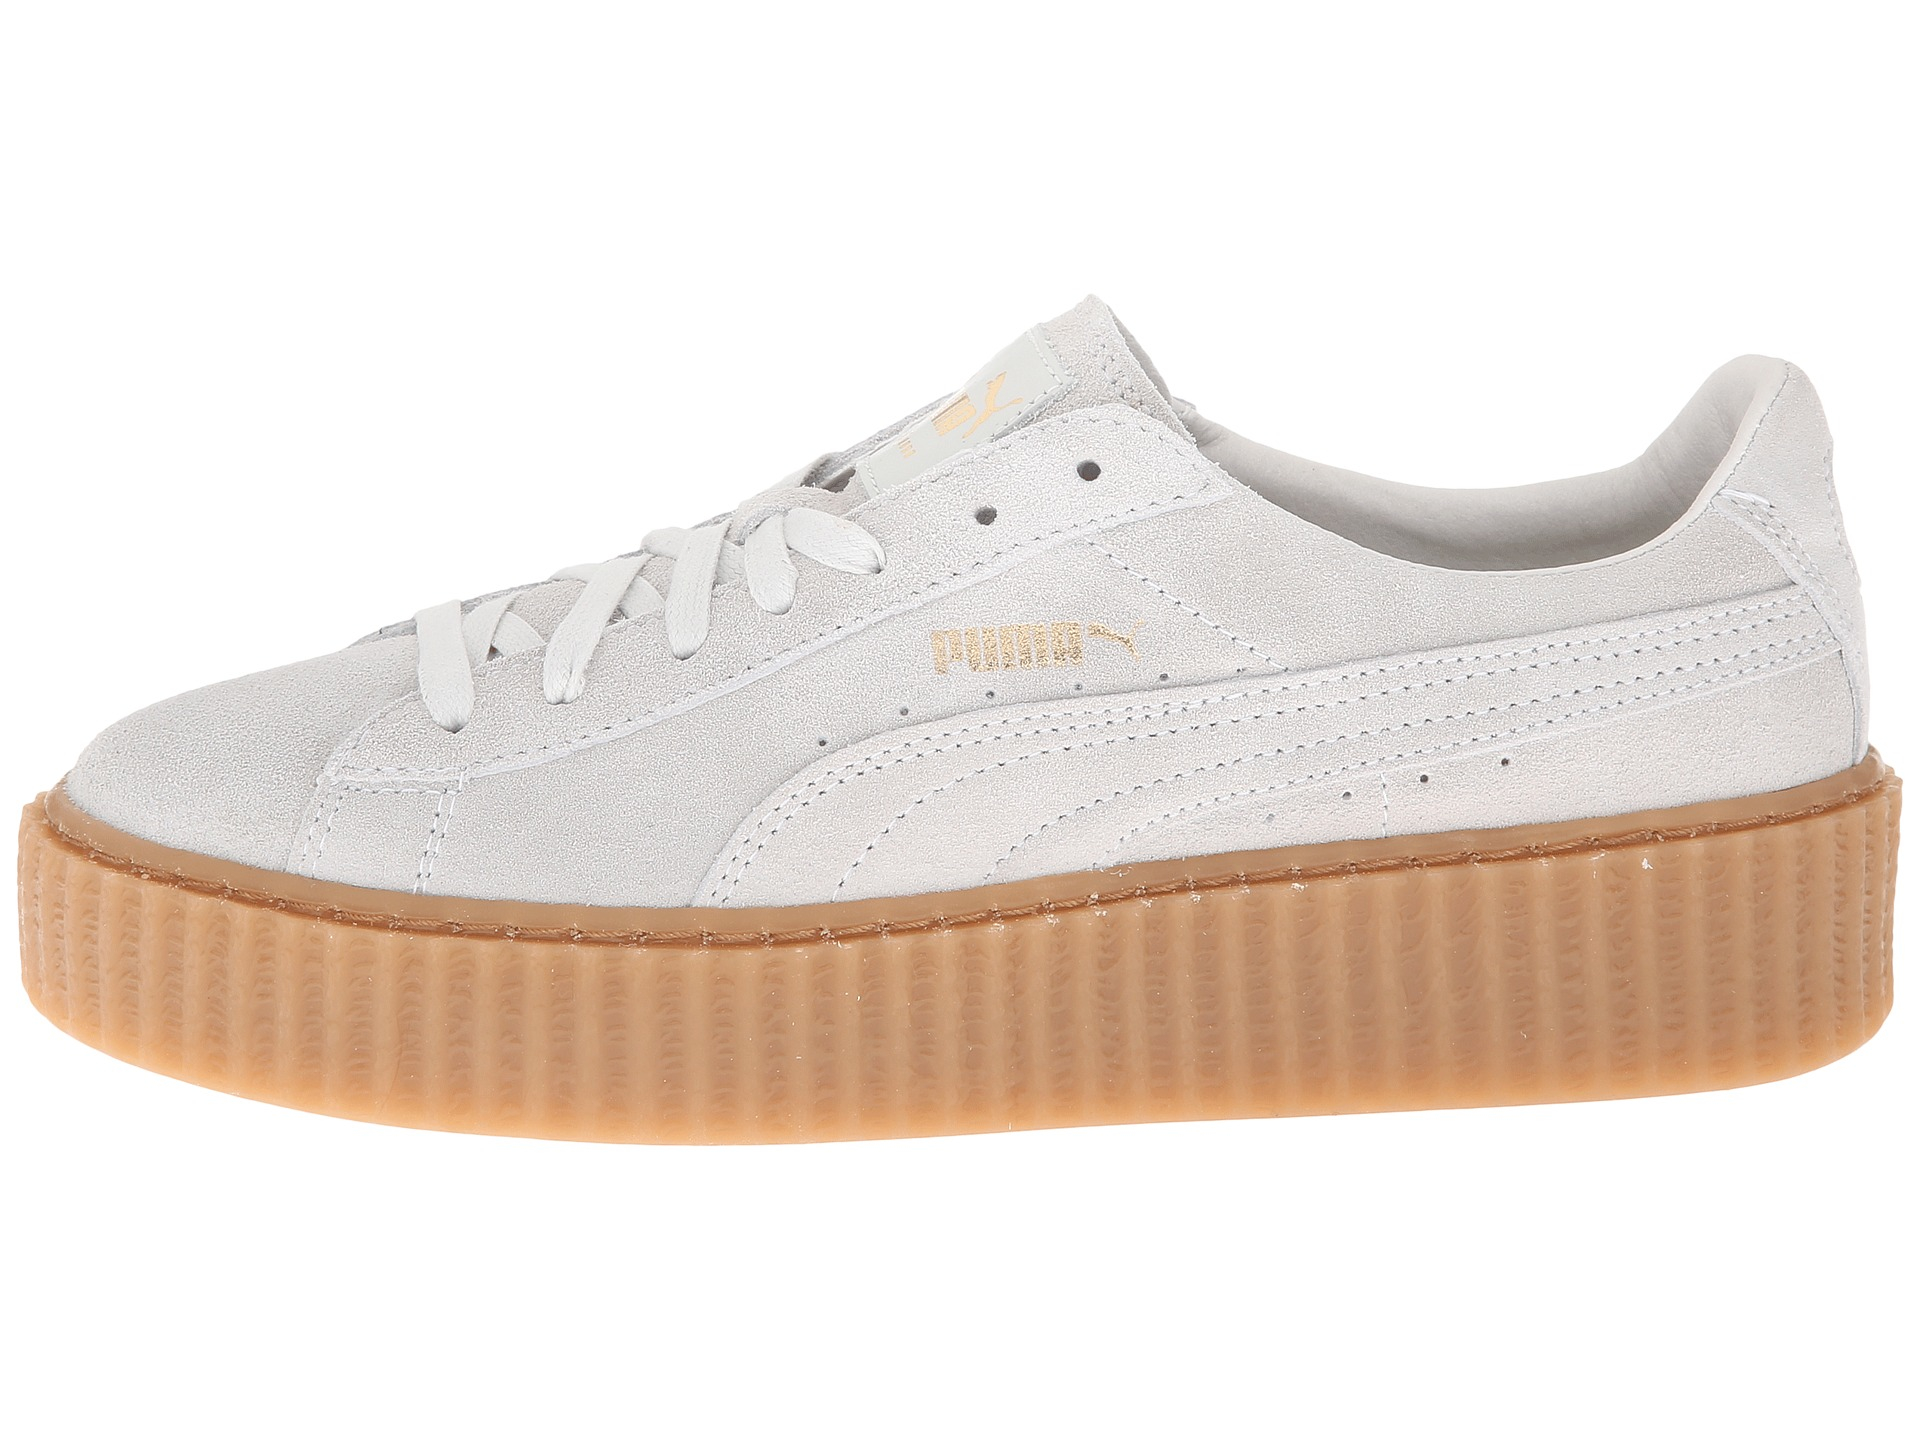 PUMA Rihanna X Suede Creepers in White 